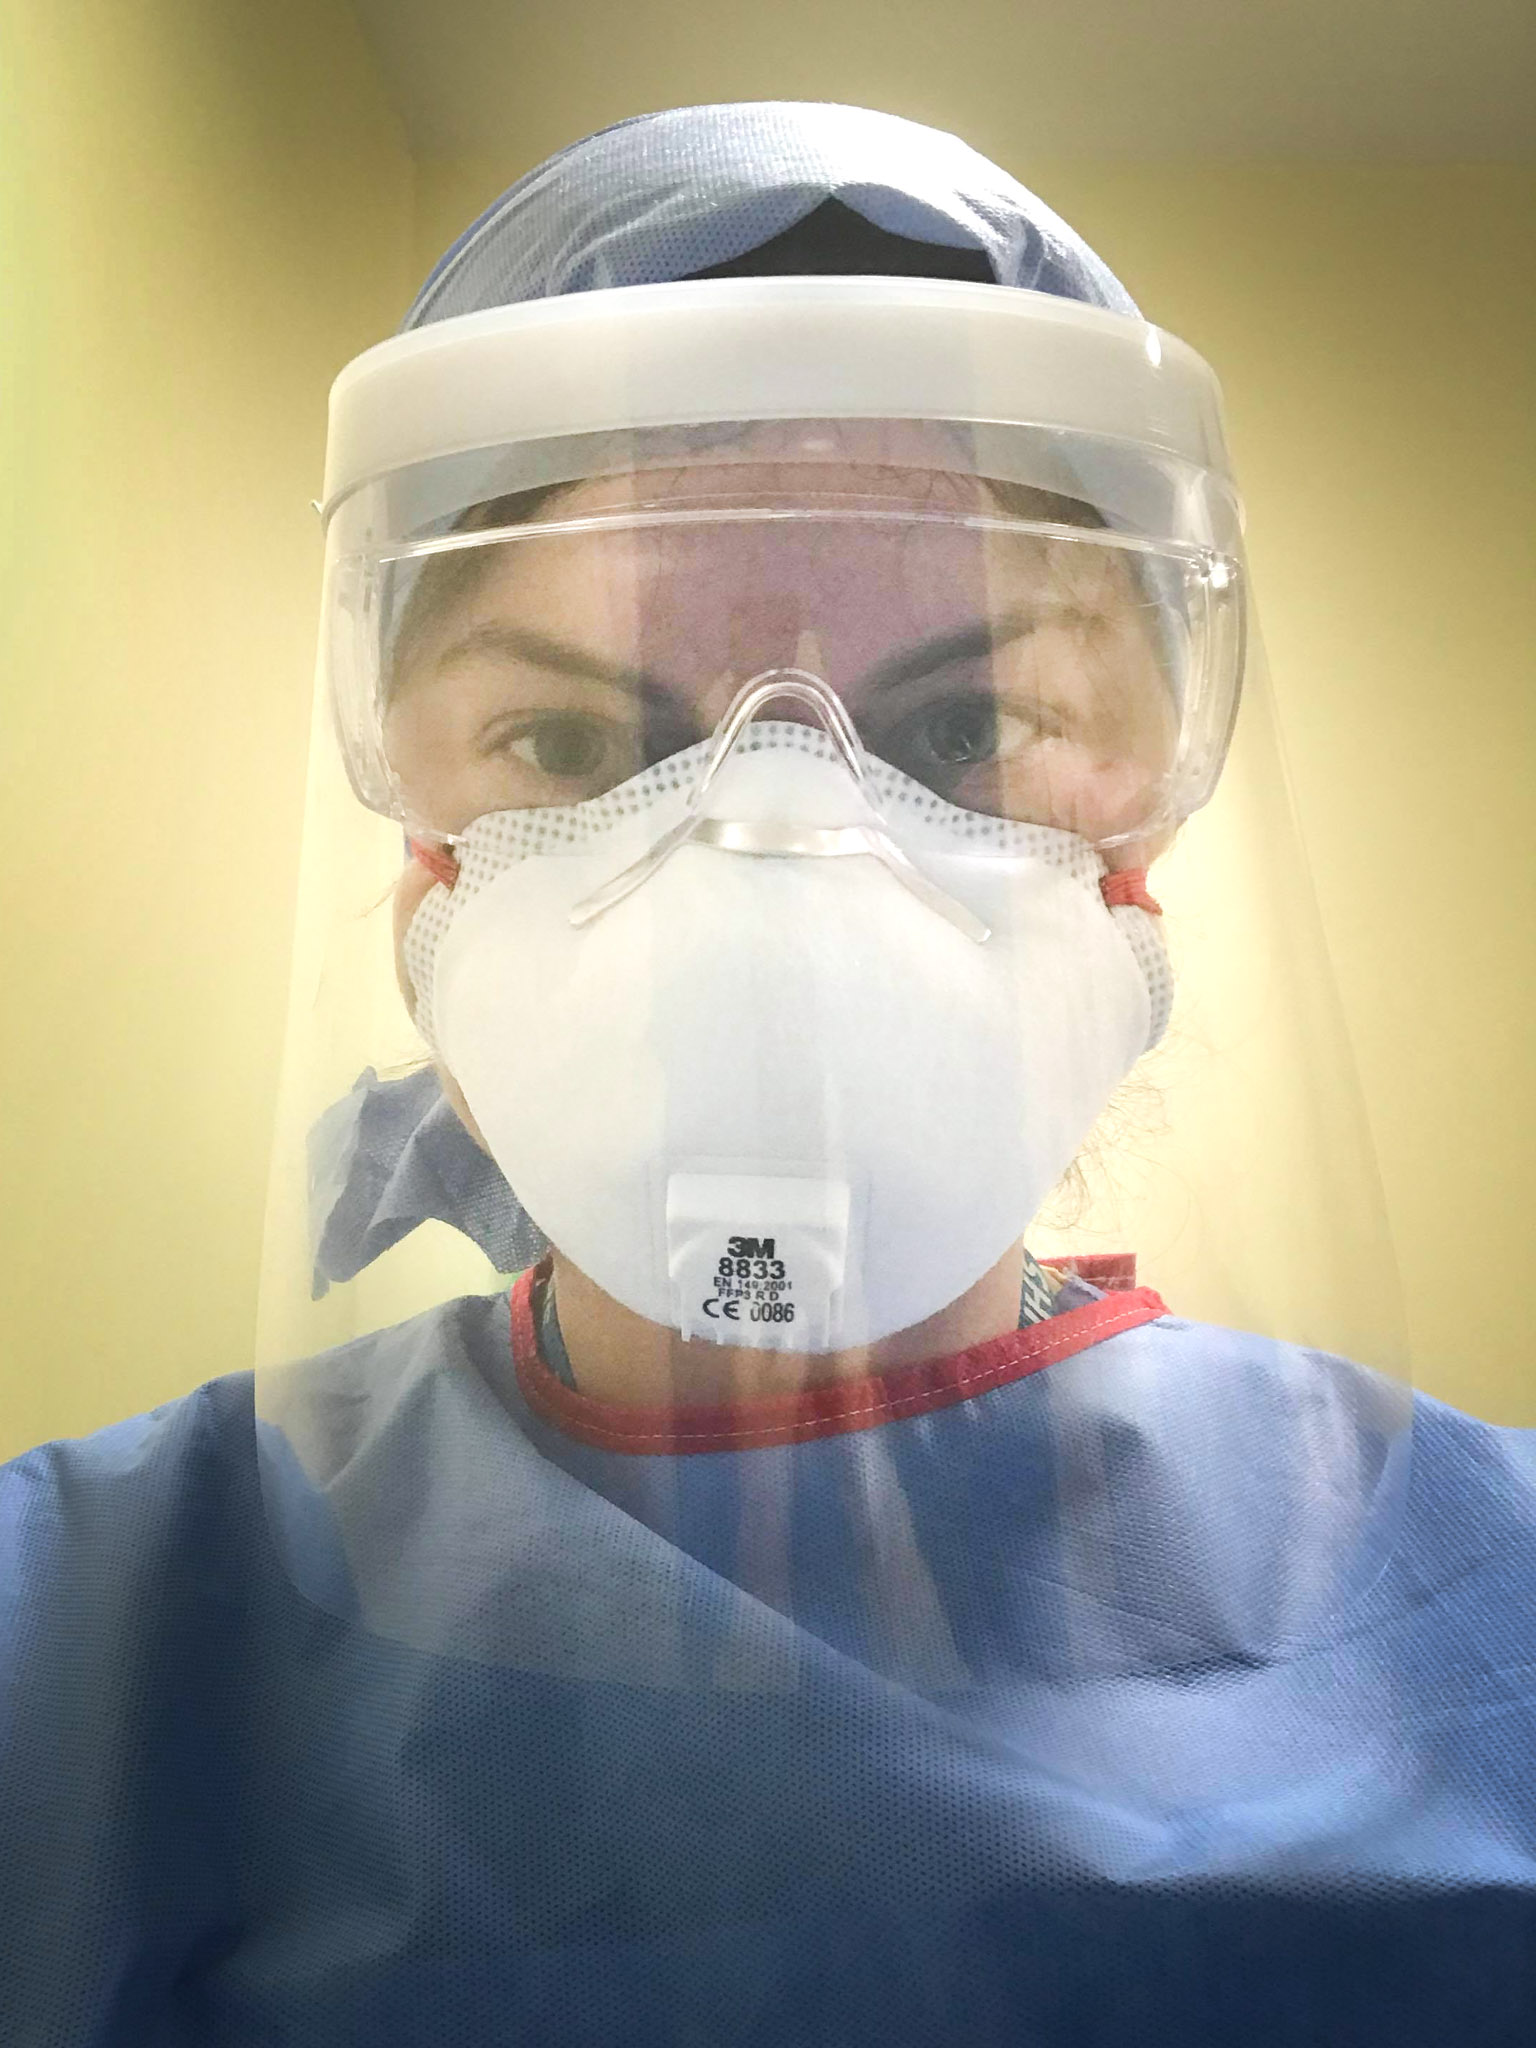 A young woman wearing medical personal protective clothing